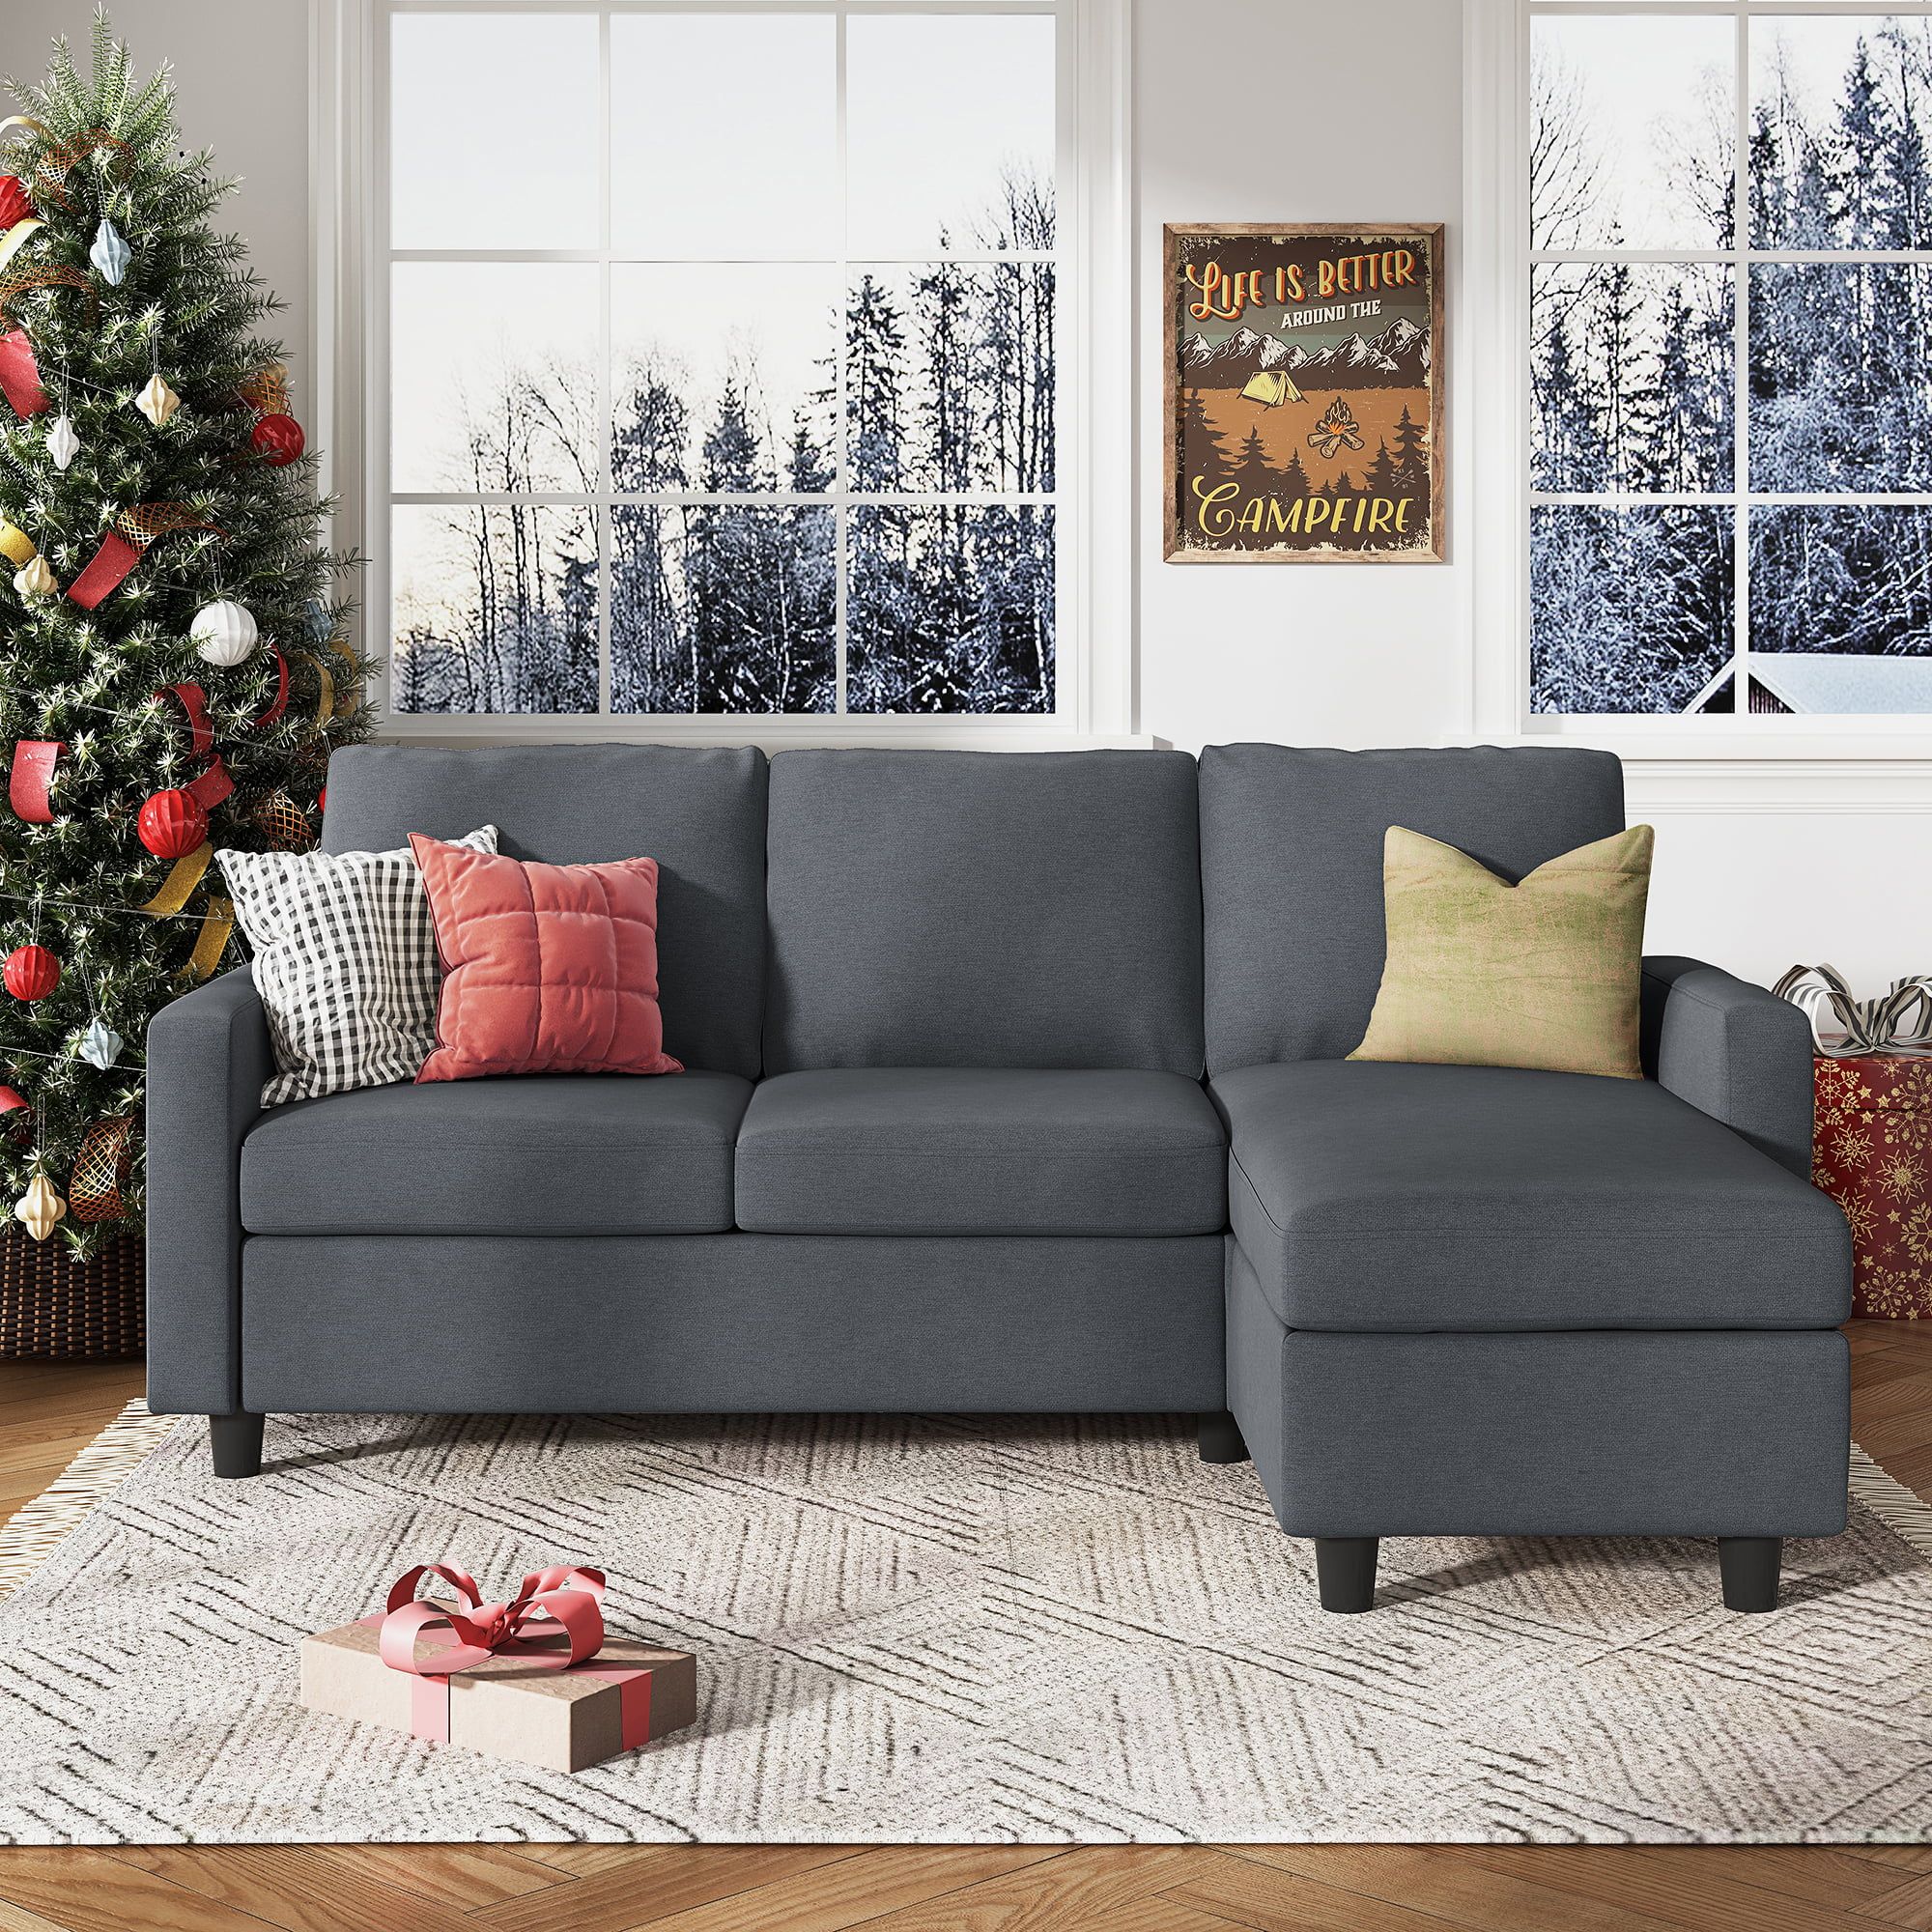 Honbay Reversible Sectional Apartment Sofa L Shaped Couch For Living Room,  Bluish Gray – Walmart Pertaining To L Shapped Apartment Sofas (View 3 of 20)